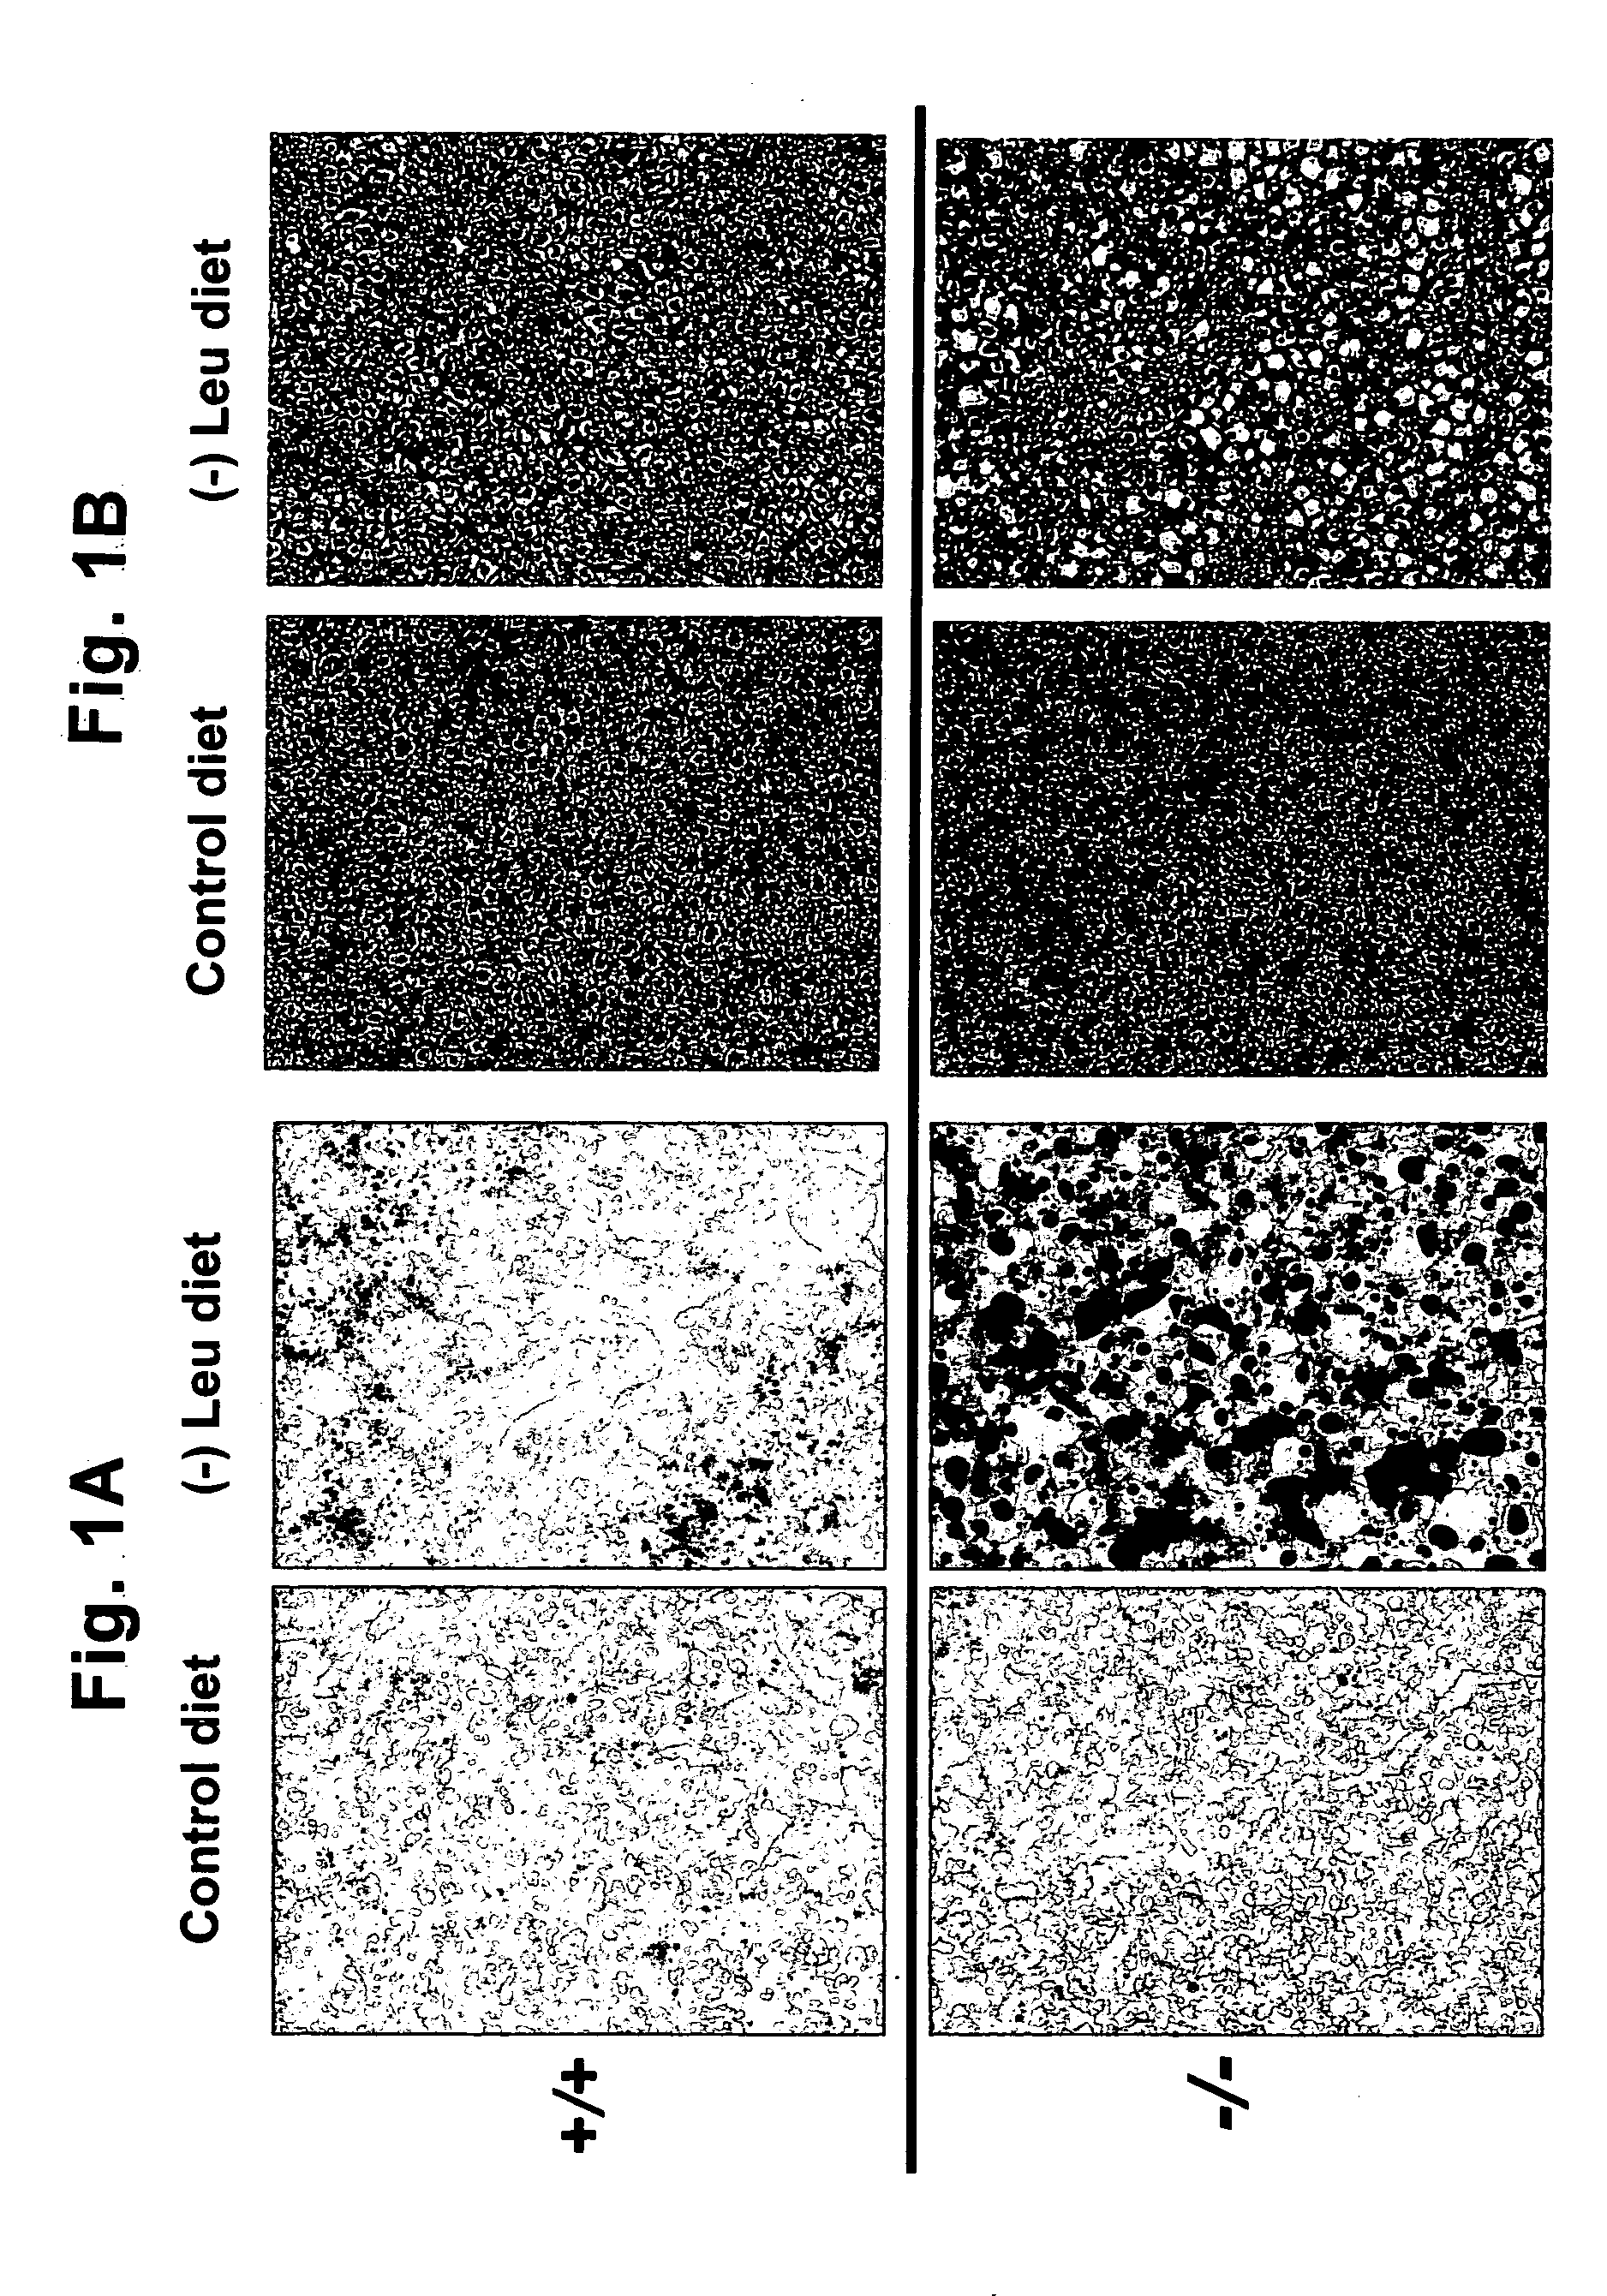 Methods for reduction of adipose tissue mass